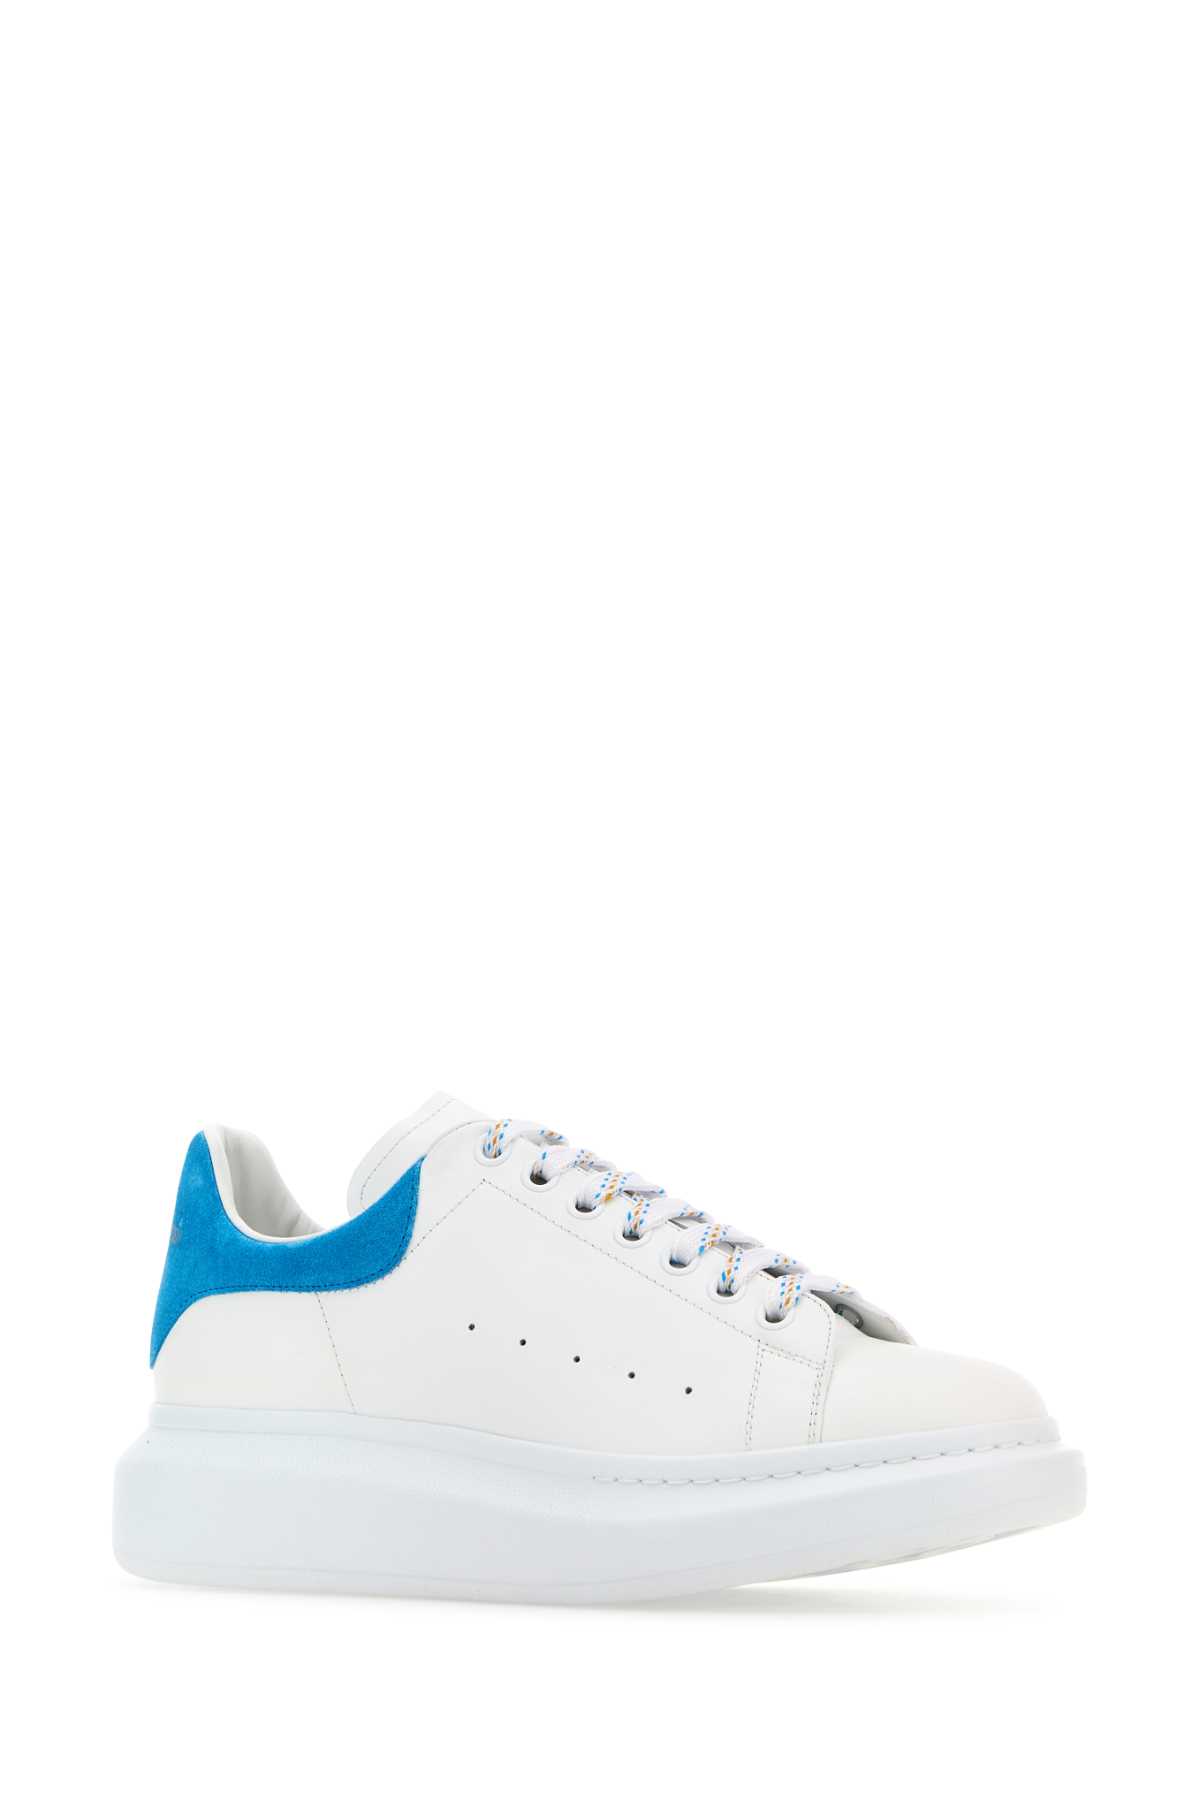 Alexander Mcqueen White Leather Sneakers With Light Blue Suede Heel In Whitelapisblue